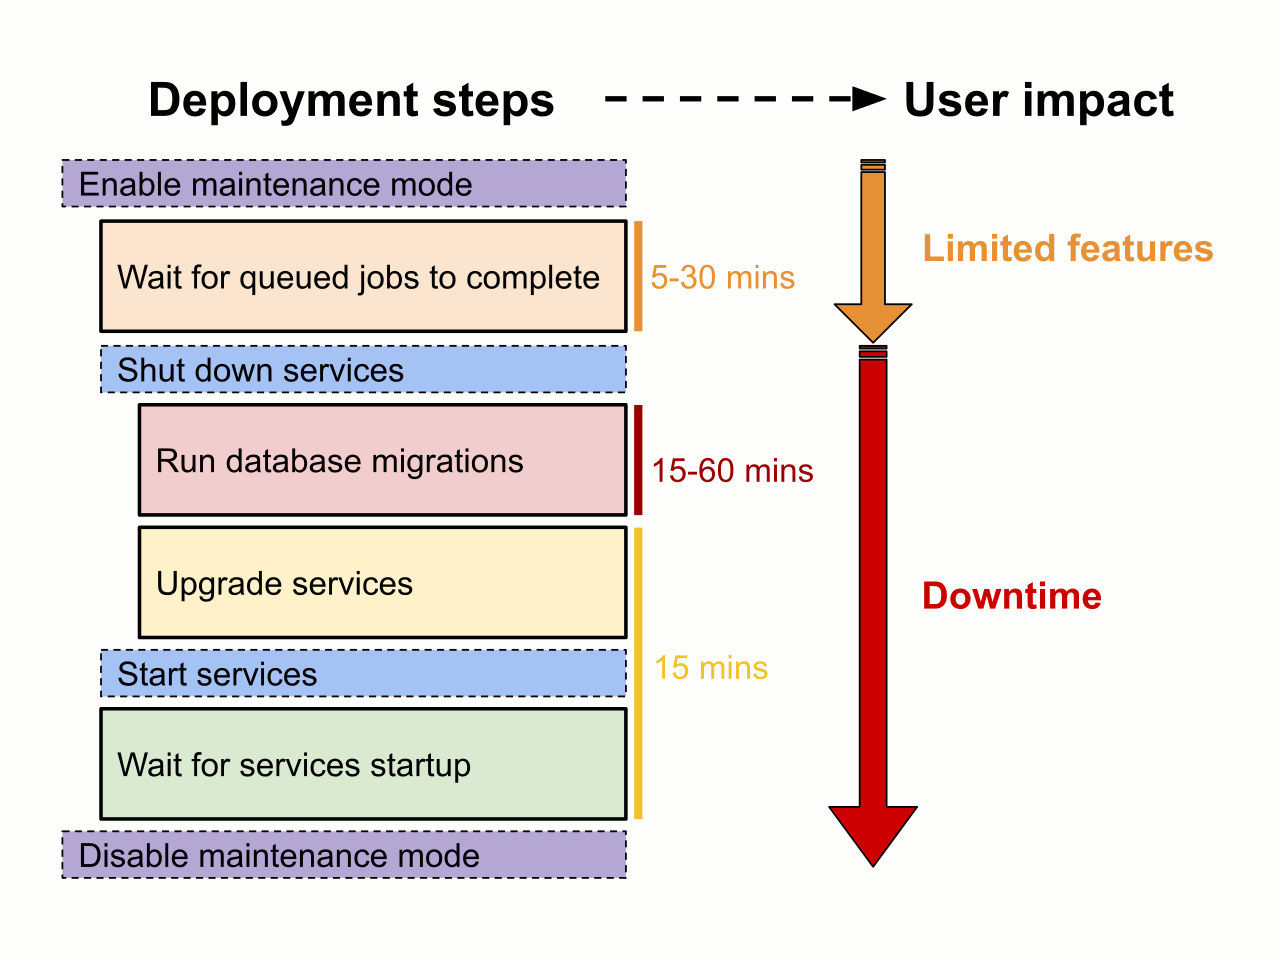 Mapping deployment steps and associated user impact